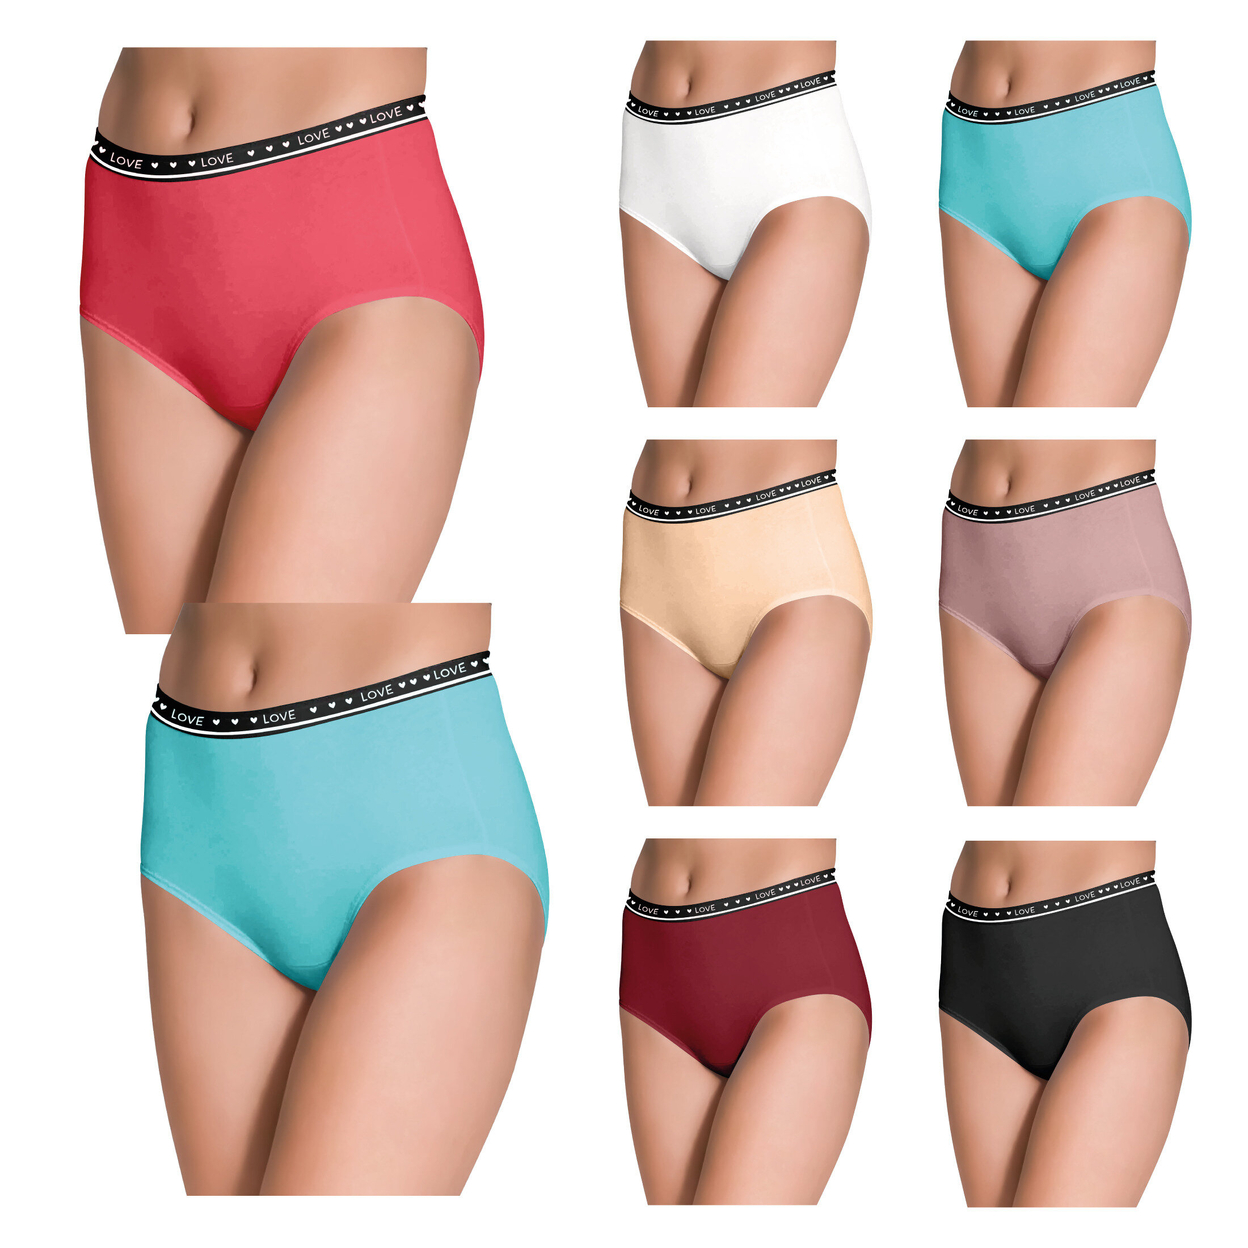 6-Pack: Women's Ultra Soft Moisture Wicking Panties Cotton Perfect Fit Underwear (Plus Sizes Available) - Small